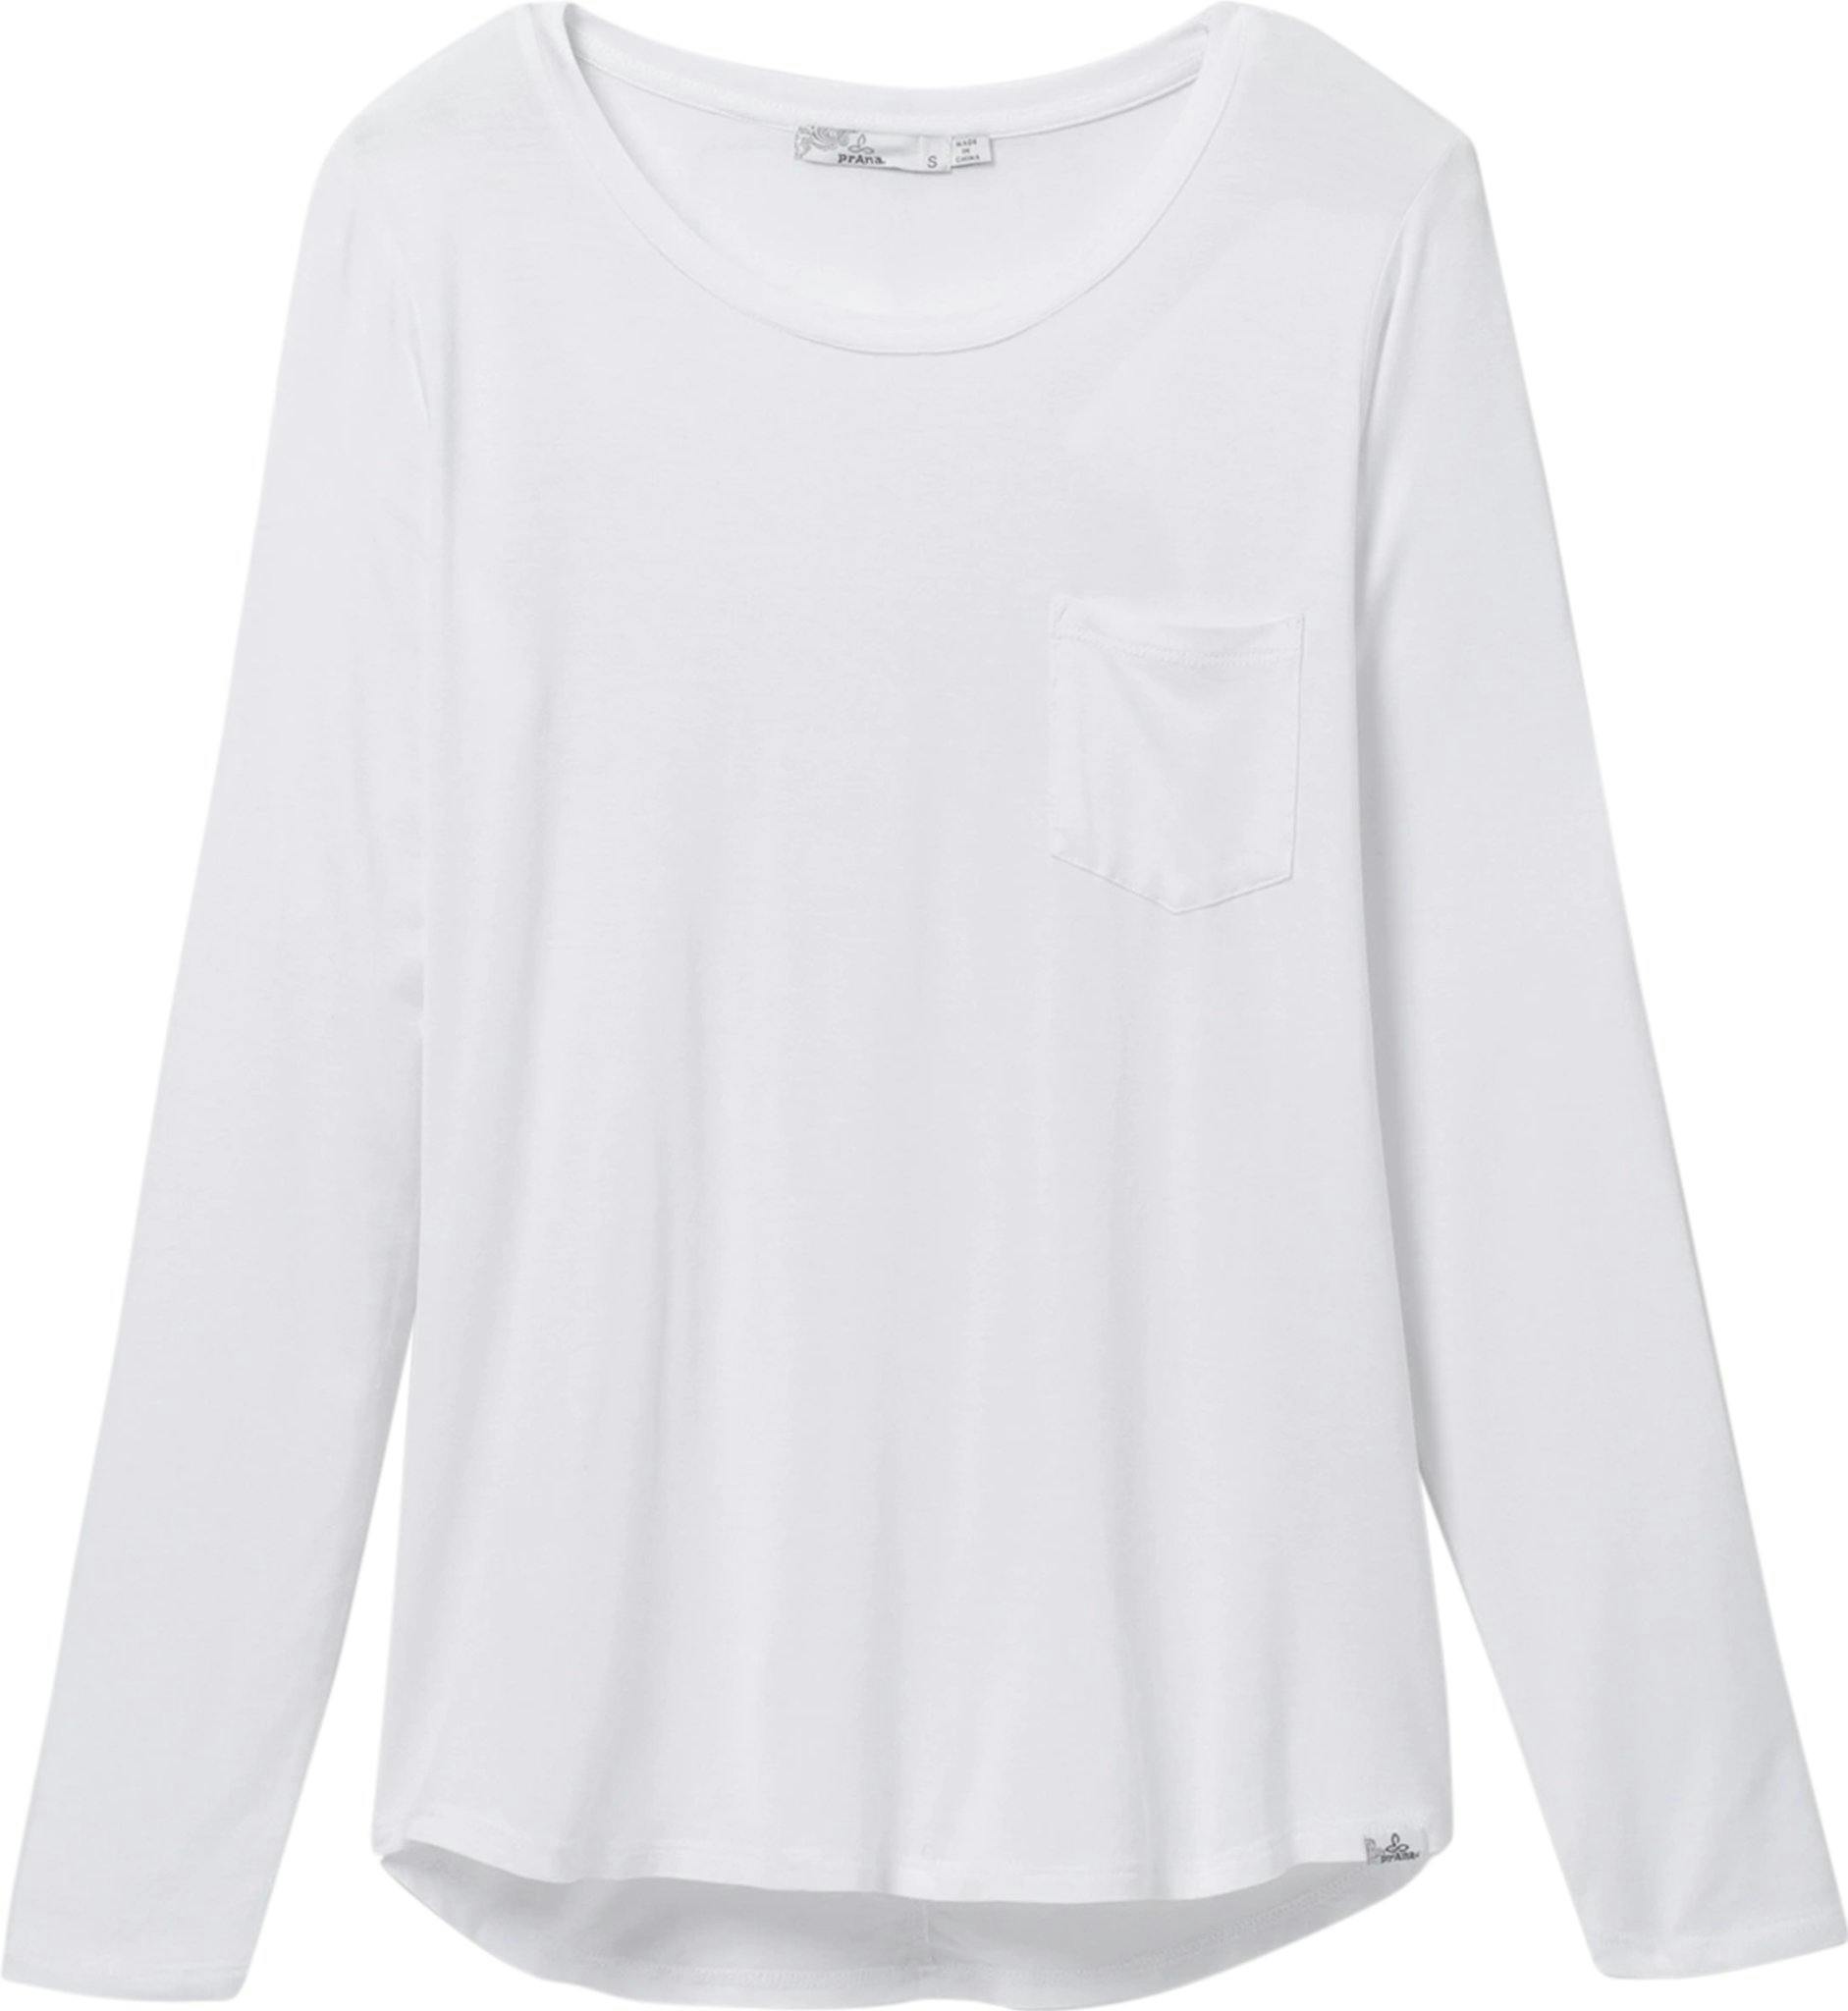 Product image for Foundation Long Sleeve Crew Neck Top - Women's